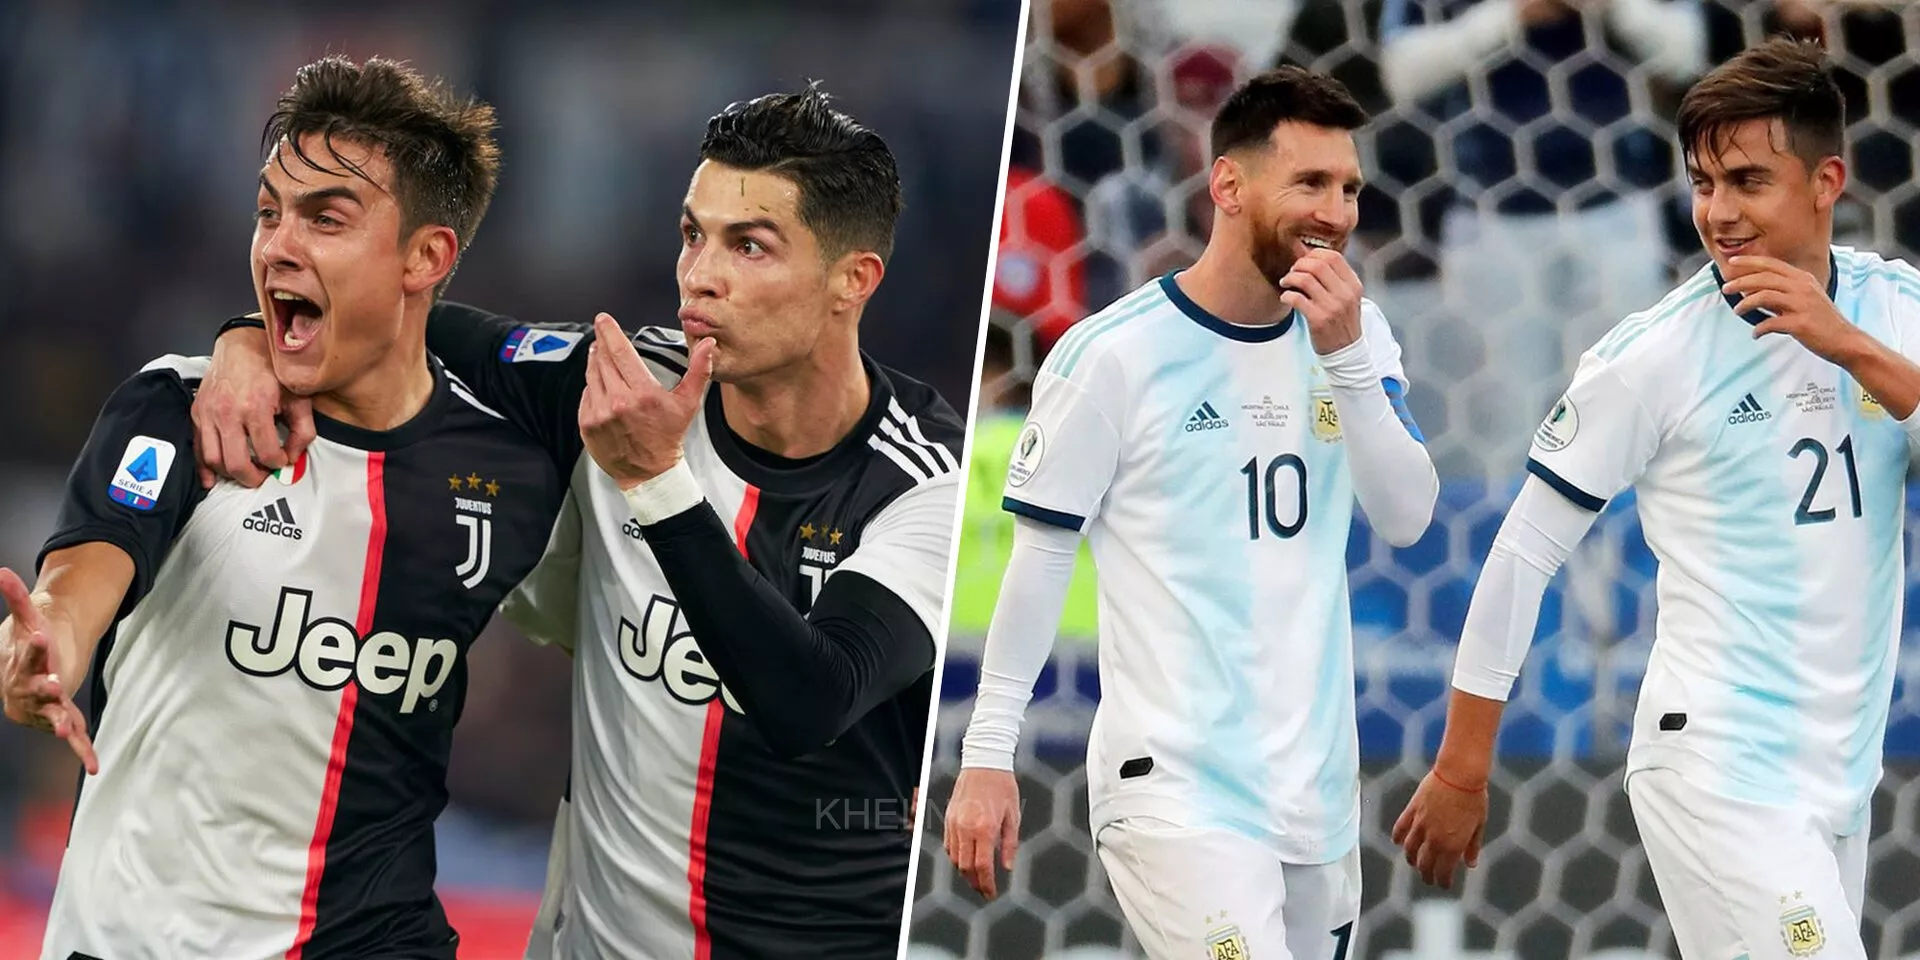 The 21 players to play alongside both Messi & Ronaldo - & what